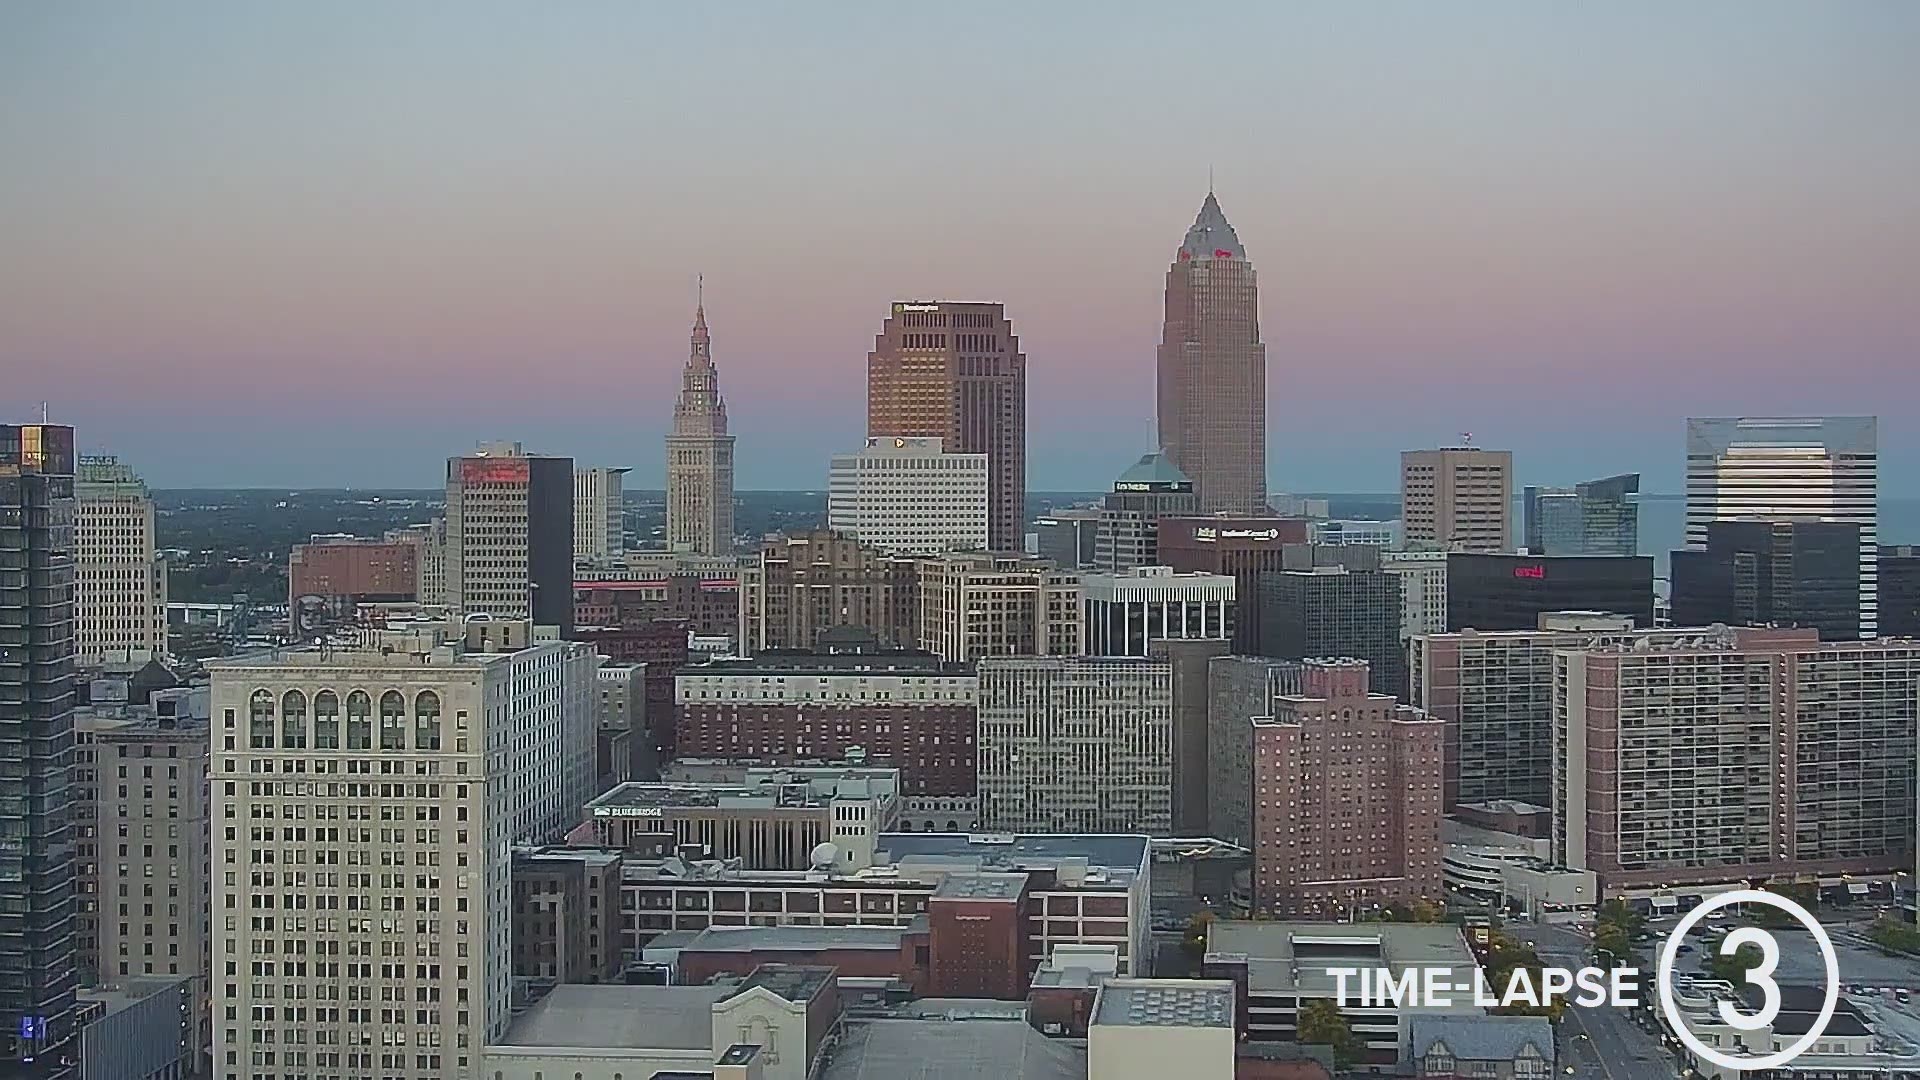 Check out our all day weather time-lapse on Thursday from sunrise to sunset as seen from the WKYC Studios CSU Cam. We went from clear skies to downpours.